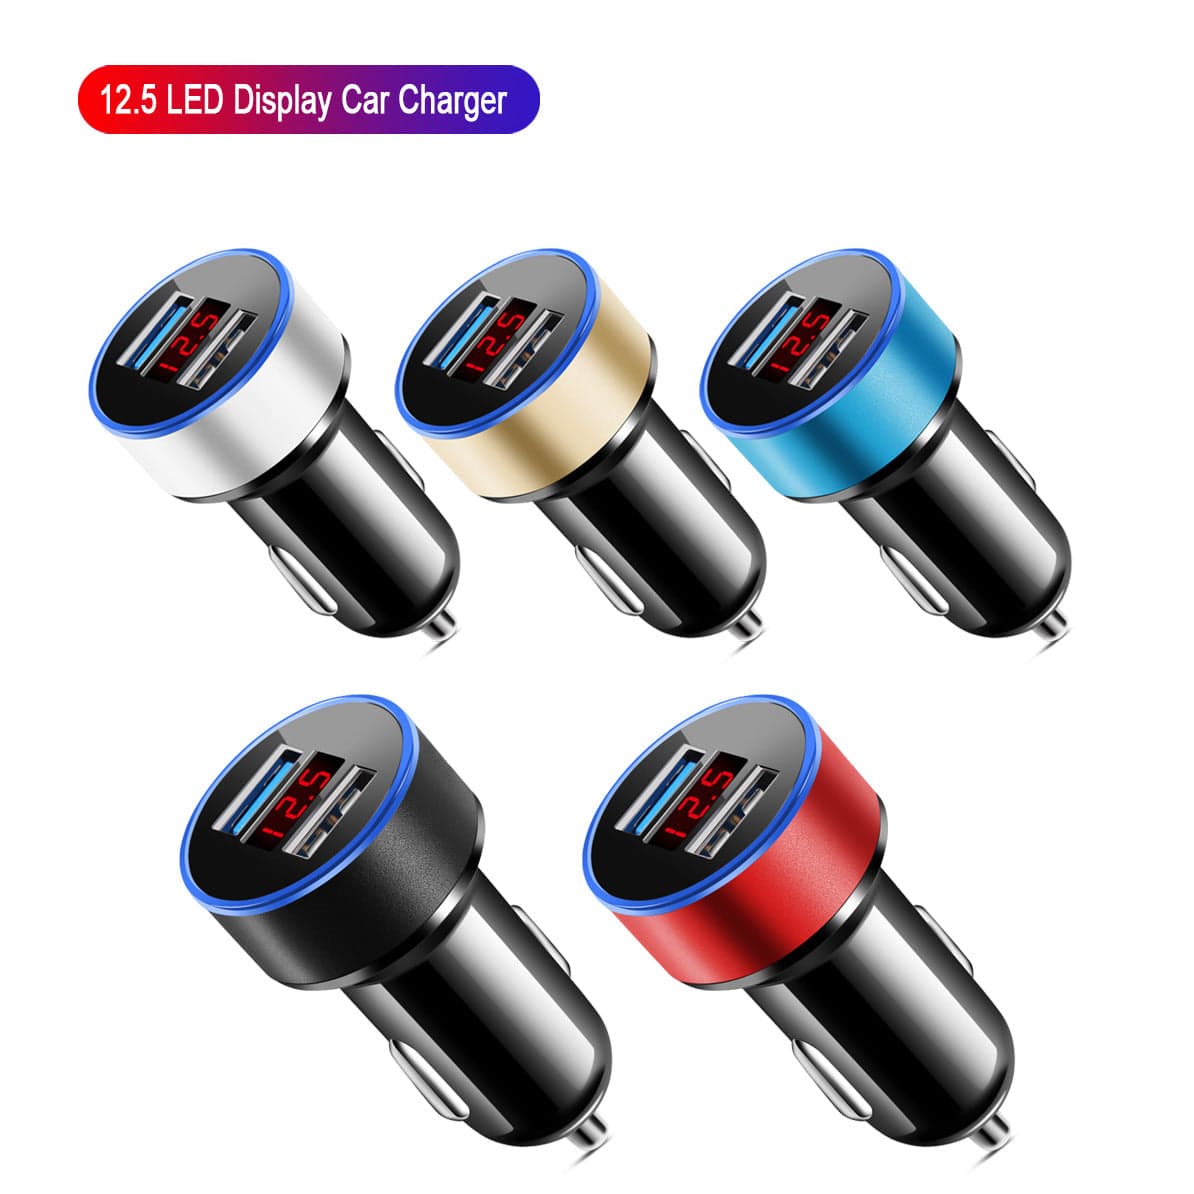 Cigarette Lighter 3.1A Digital Display Car Charger Car Dual Port USB Car Charger One Drag Two 2 Ports Car Electric Wholesale